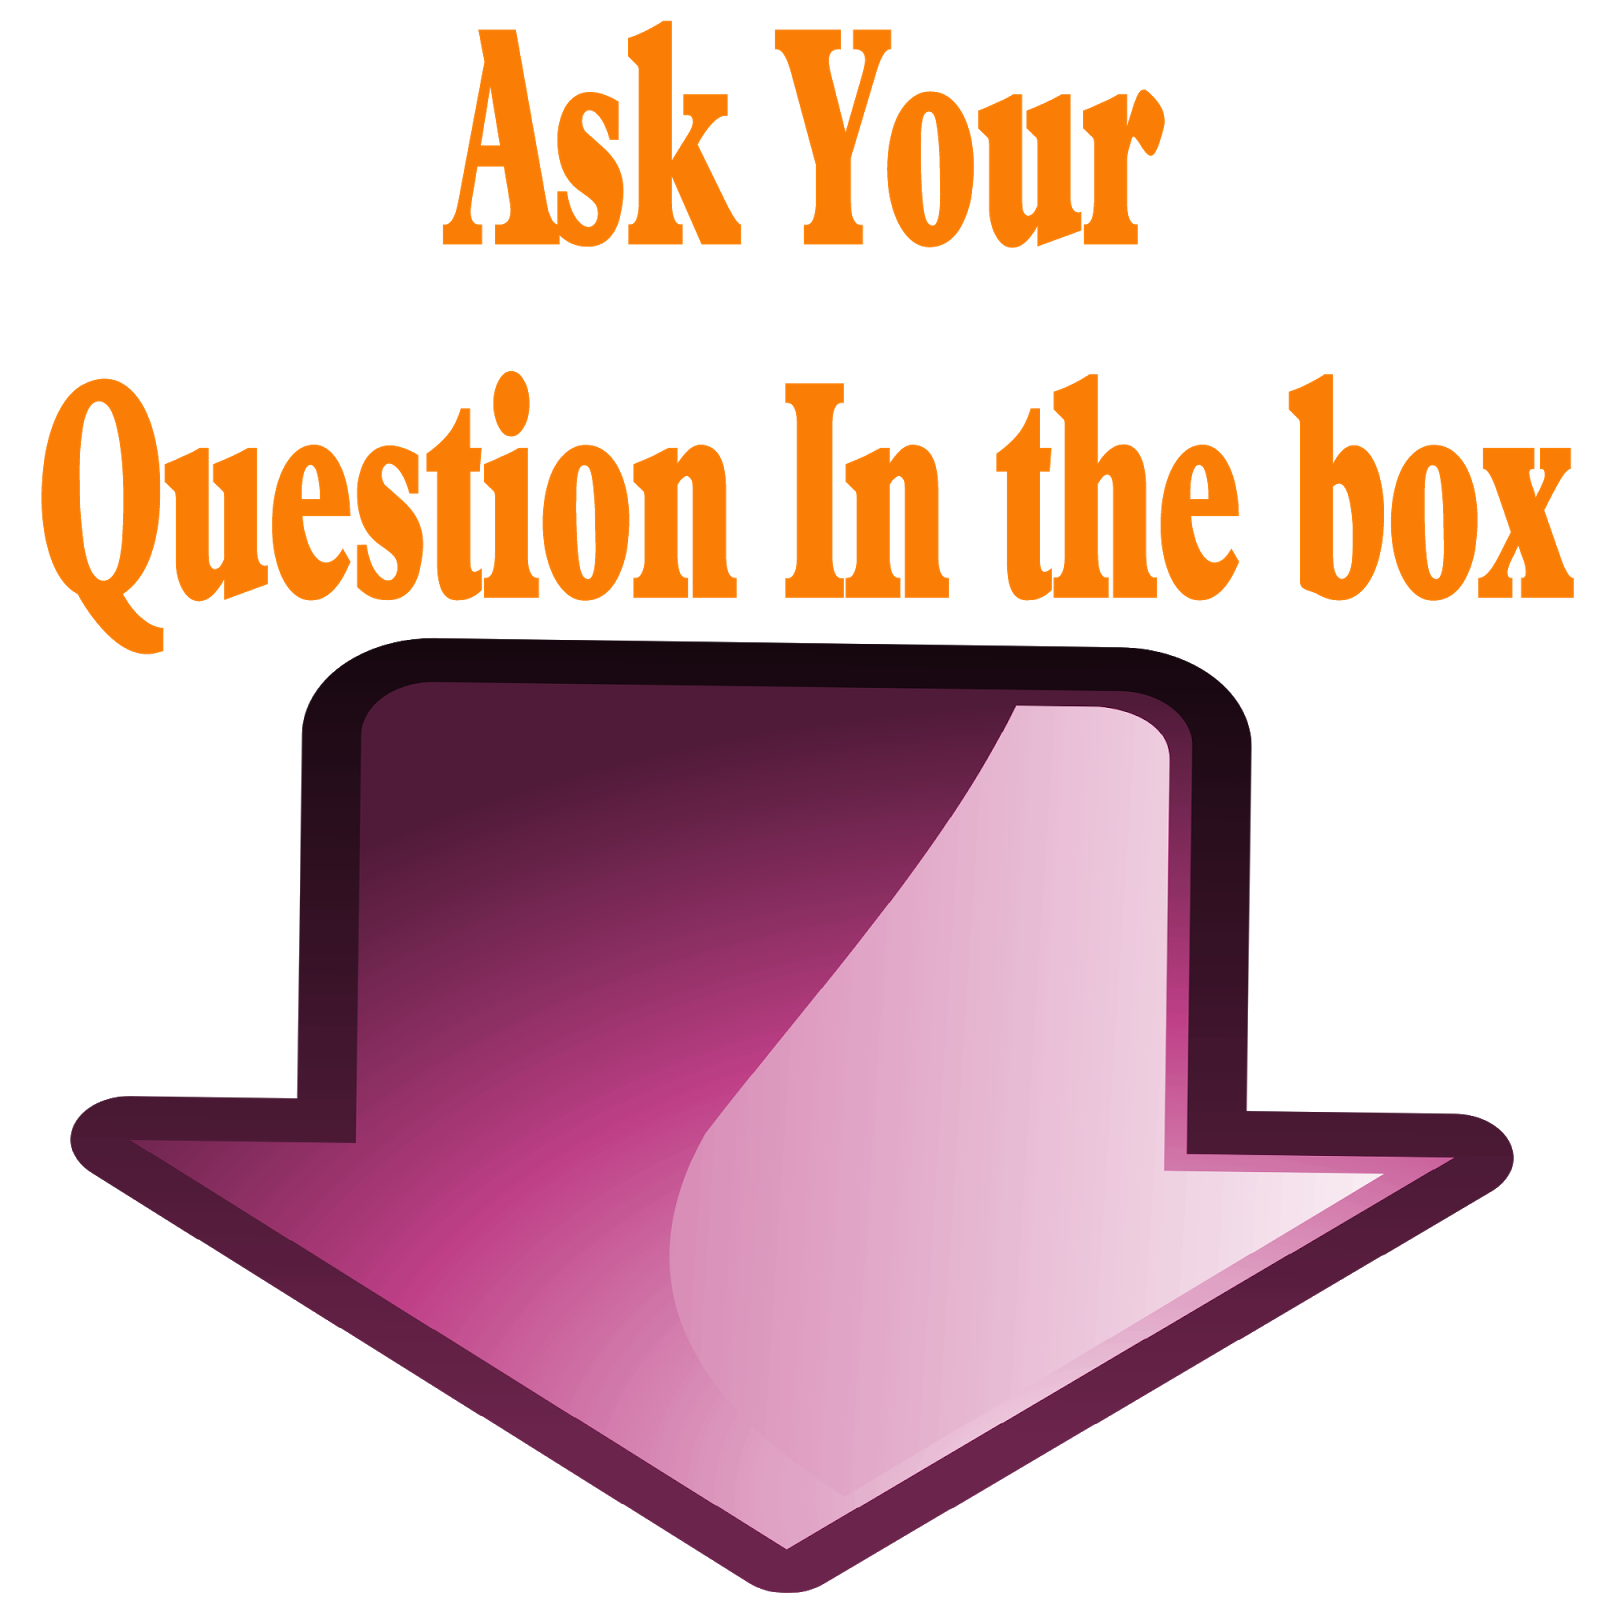 Ask your question